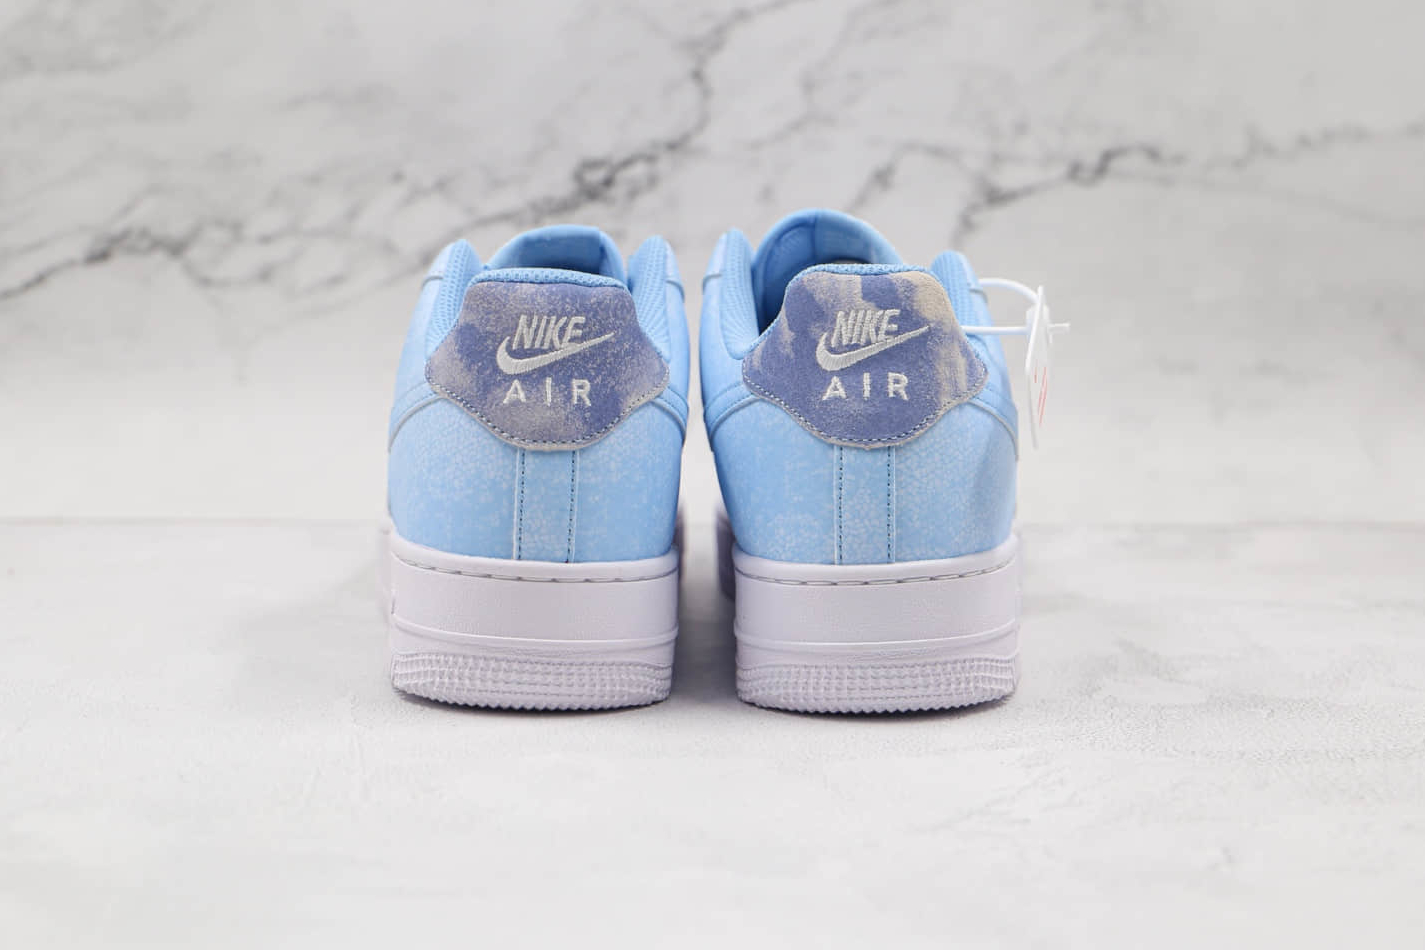 Nike Air Force 1 '07 LV8 'Psychic Blue' CZ0337-400 - Trendy Sneakers for Style-savvy Individuals